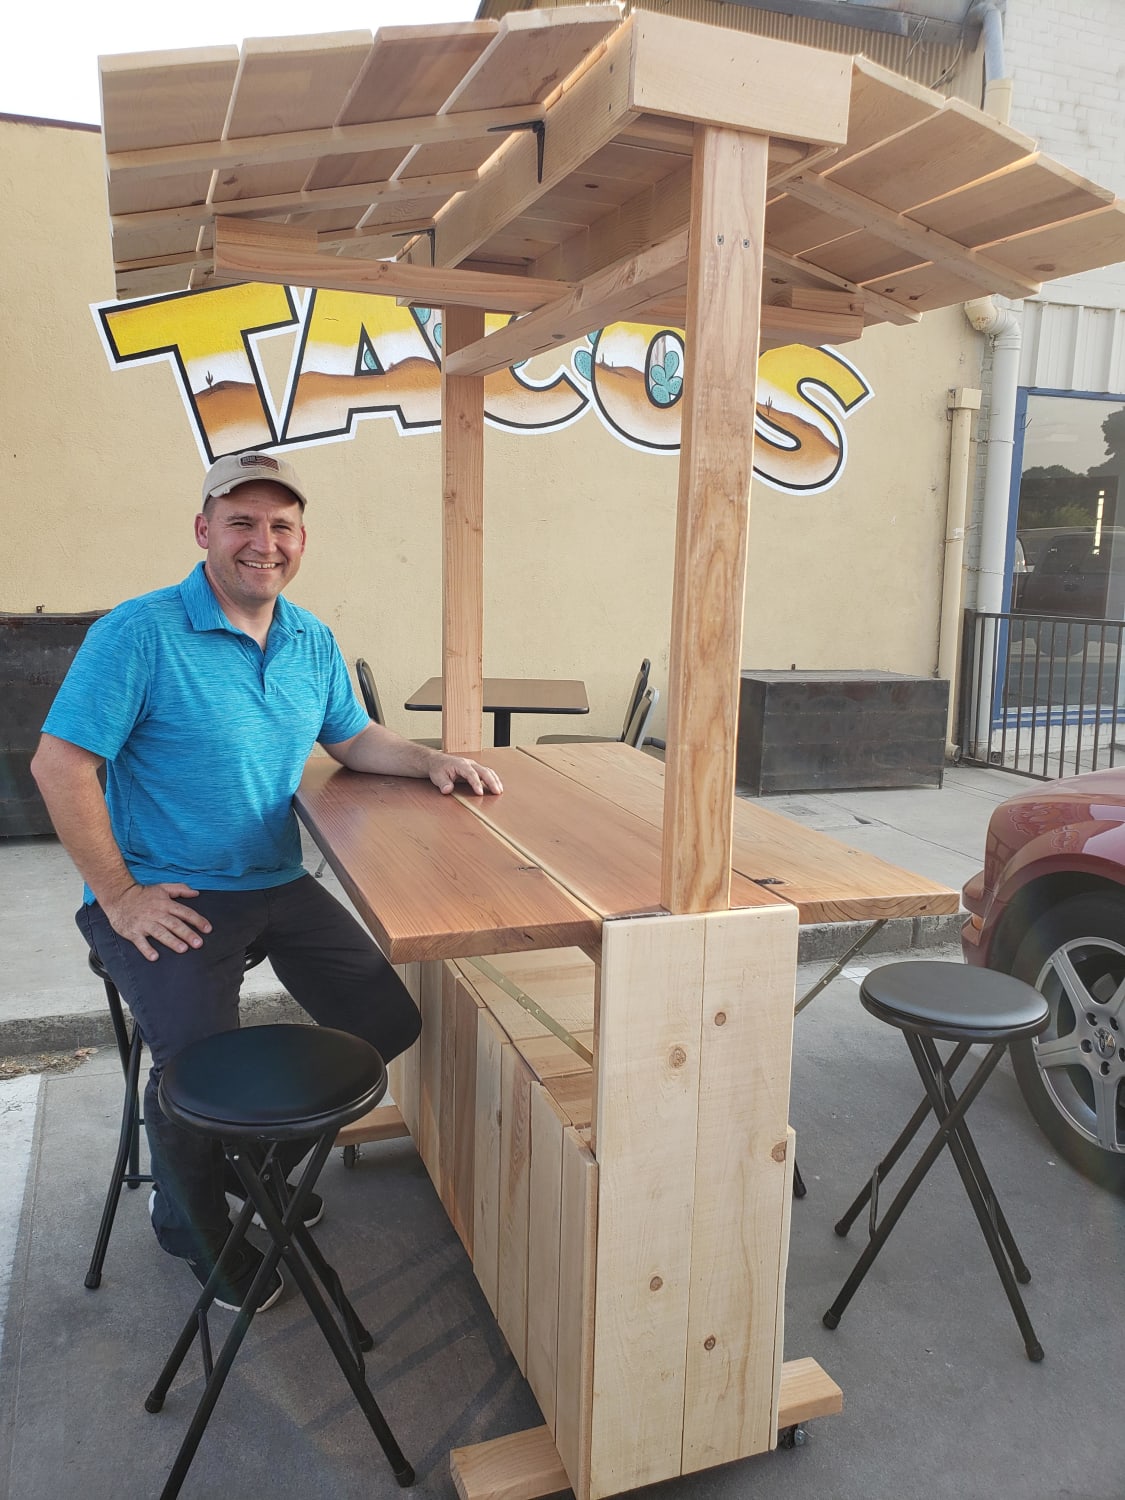 I donated a table I made to a small restaurant hoping to keep them in business.